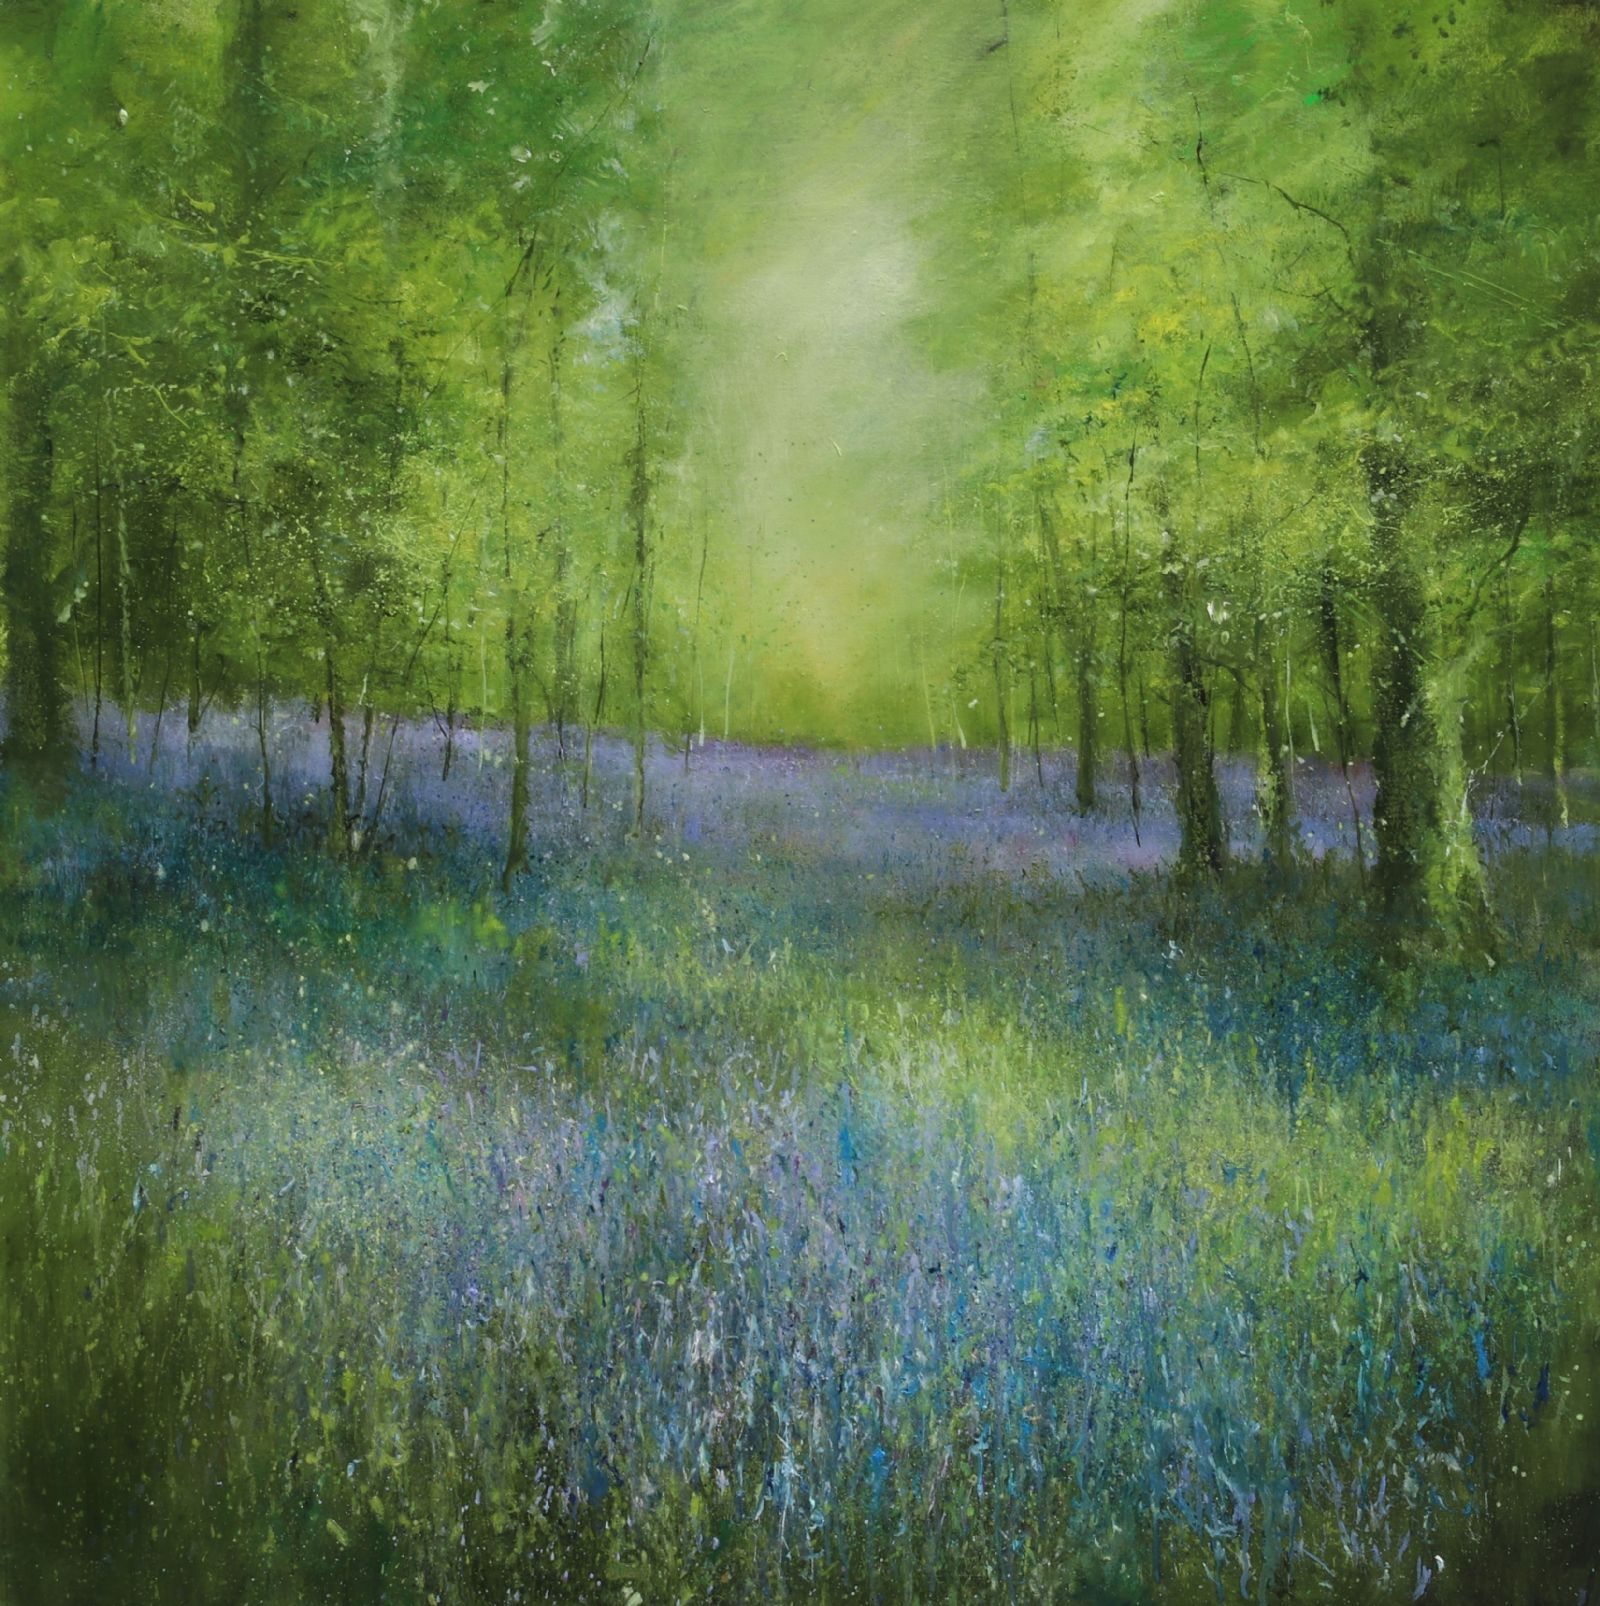 Horizon of Bluebells in the Magic Wood by Garry Pereira